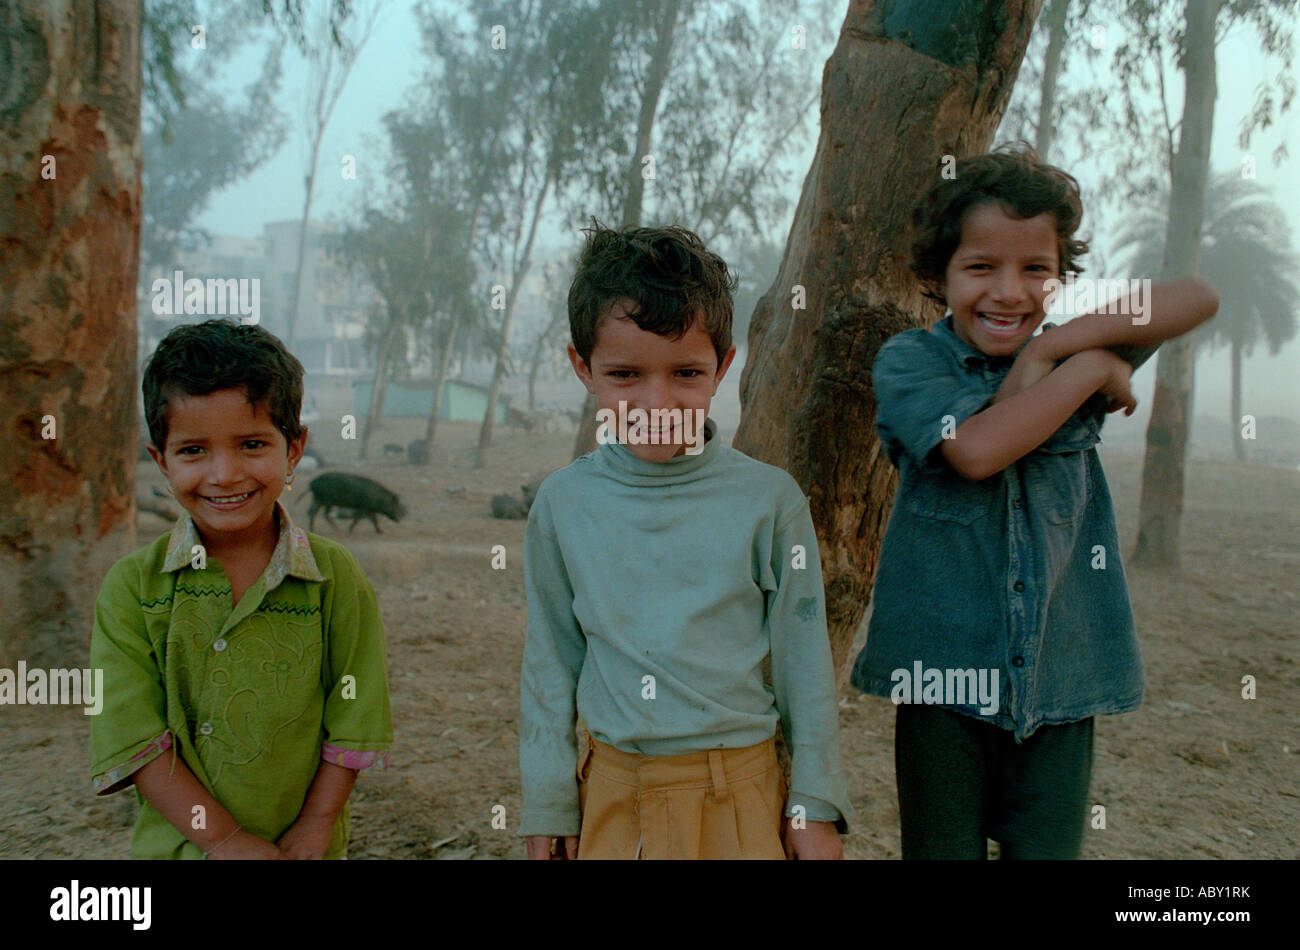 Three poor but cheerful Indian boys Stock Photo